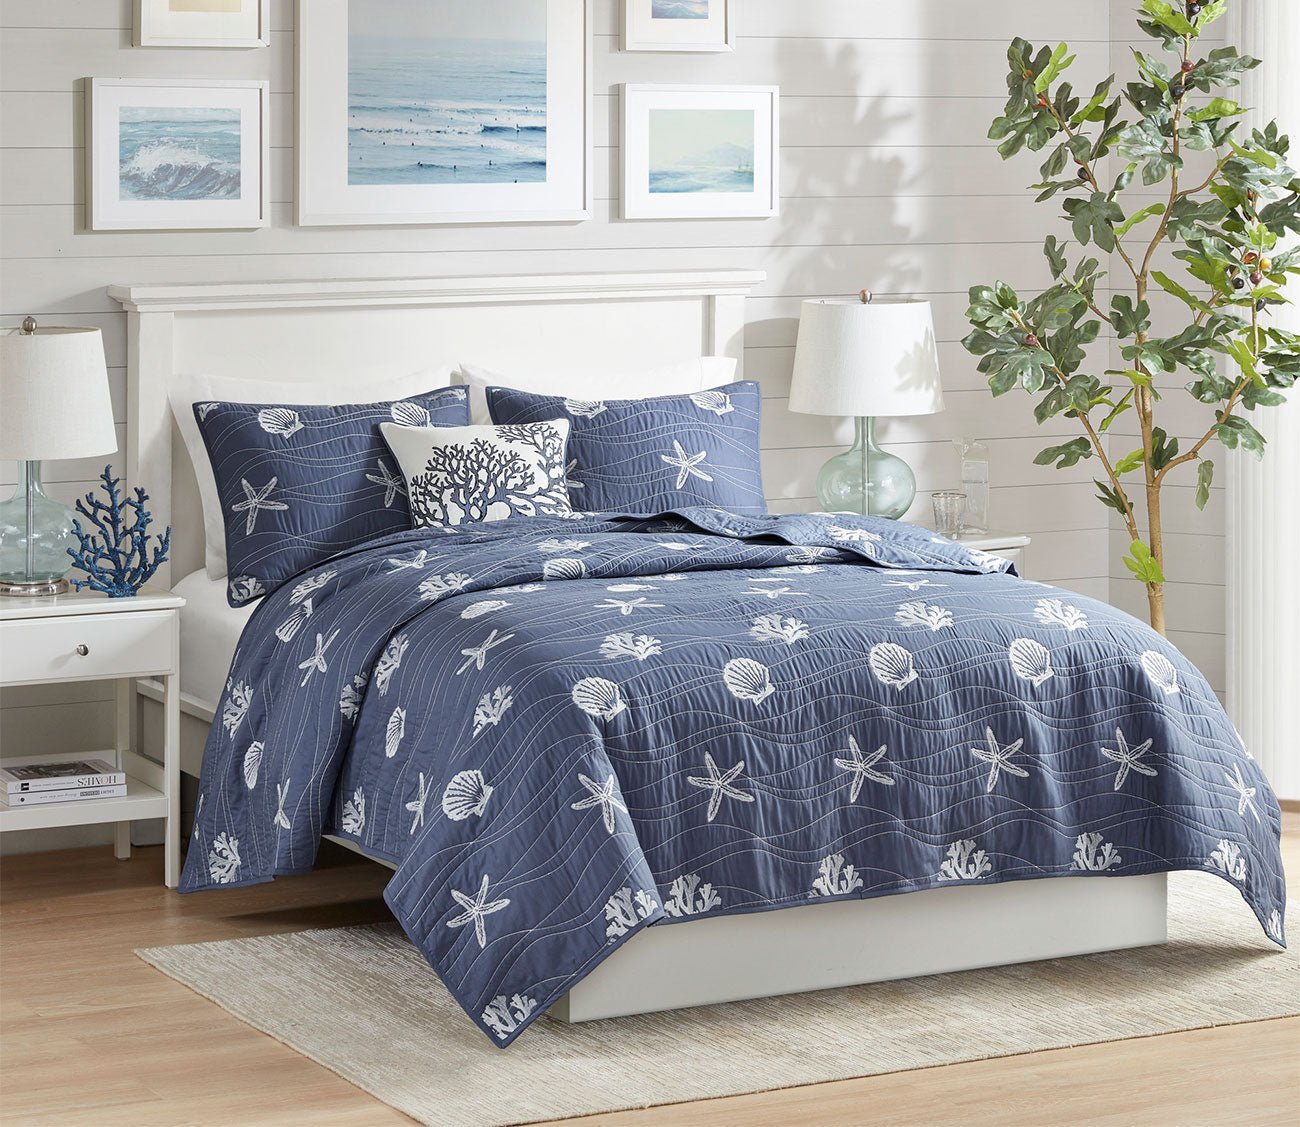 https://cdn.shopify.com/s/files/1/2420/9425/products/seaside-embroidered-cotton-4-piece-coverlet-set-by-harbor-house-711600.jpg?v=1680698183